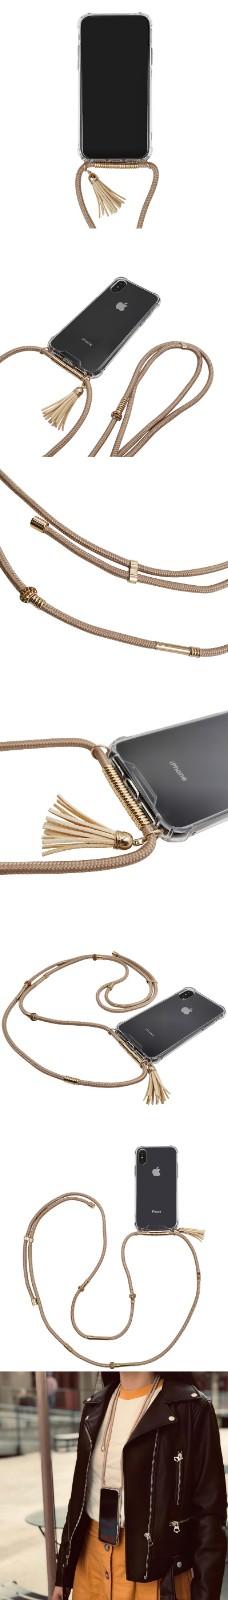 Tassel necklace protective mobile phone case for iPhone